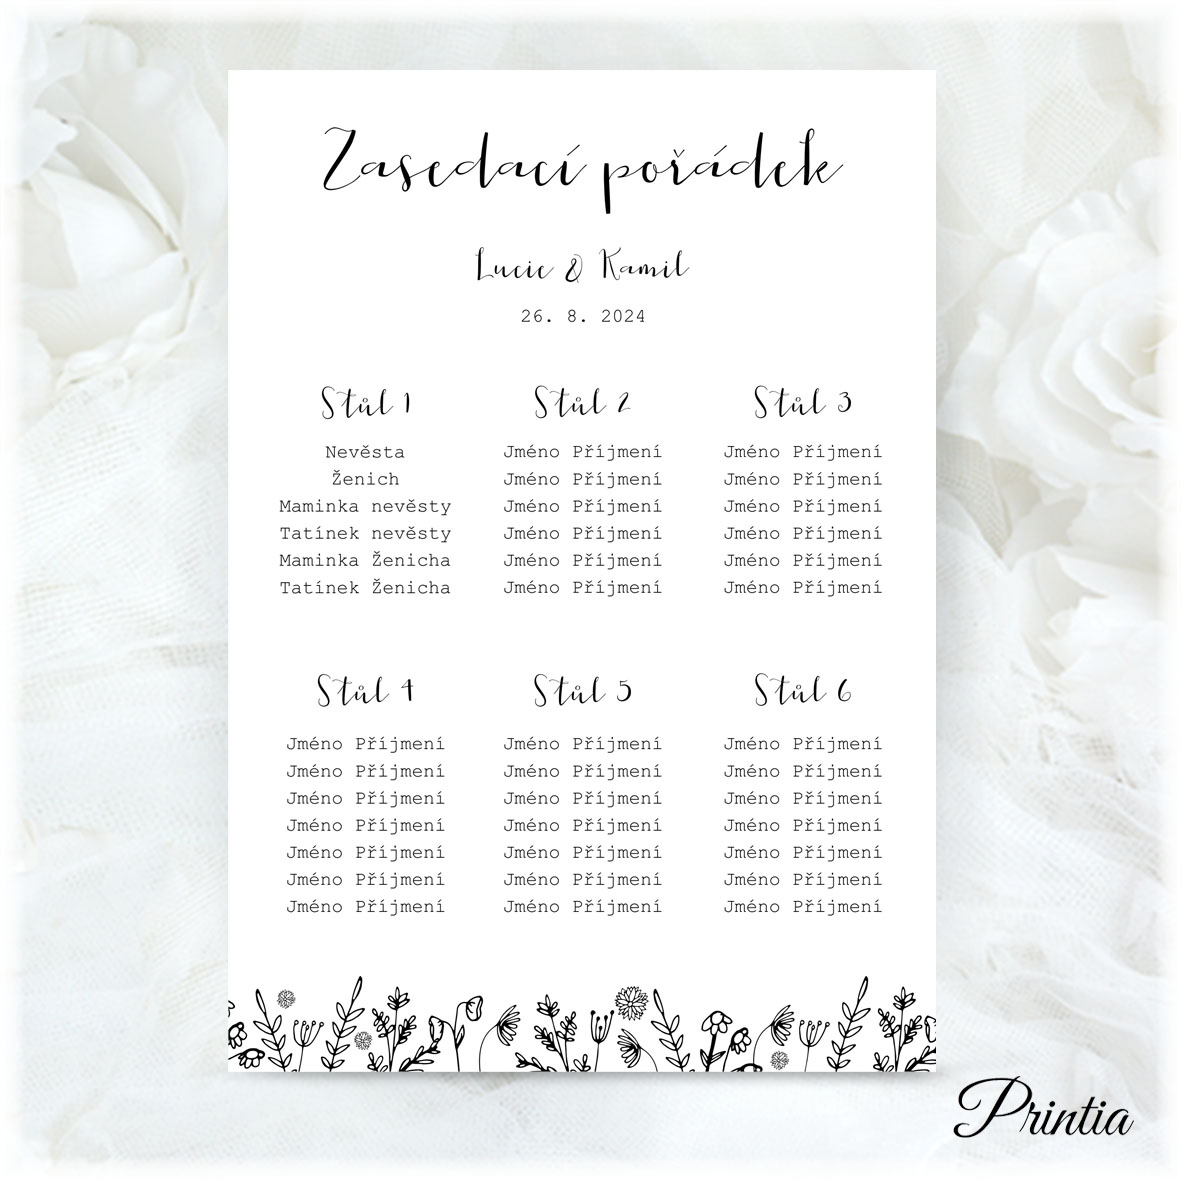 Wedding seating chart with simple meadow flowers